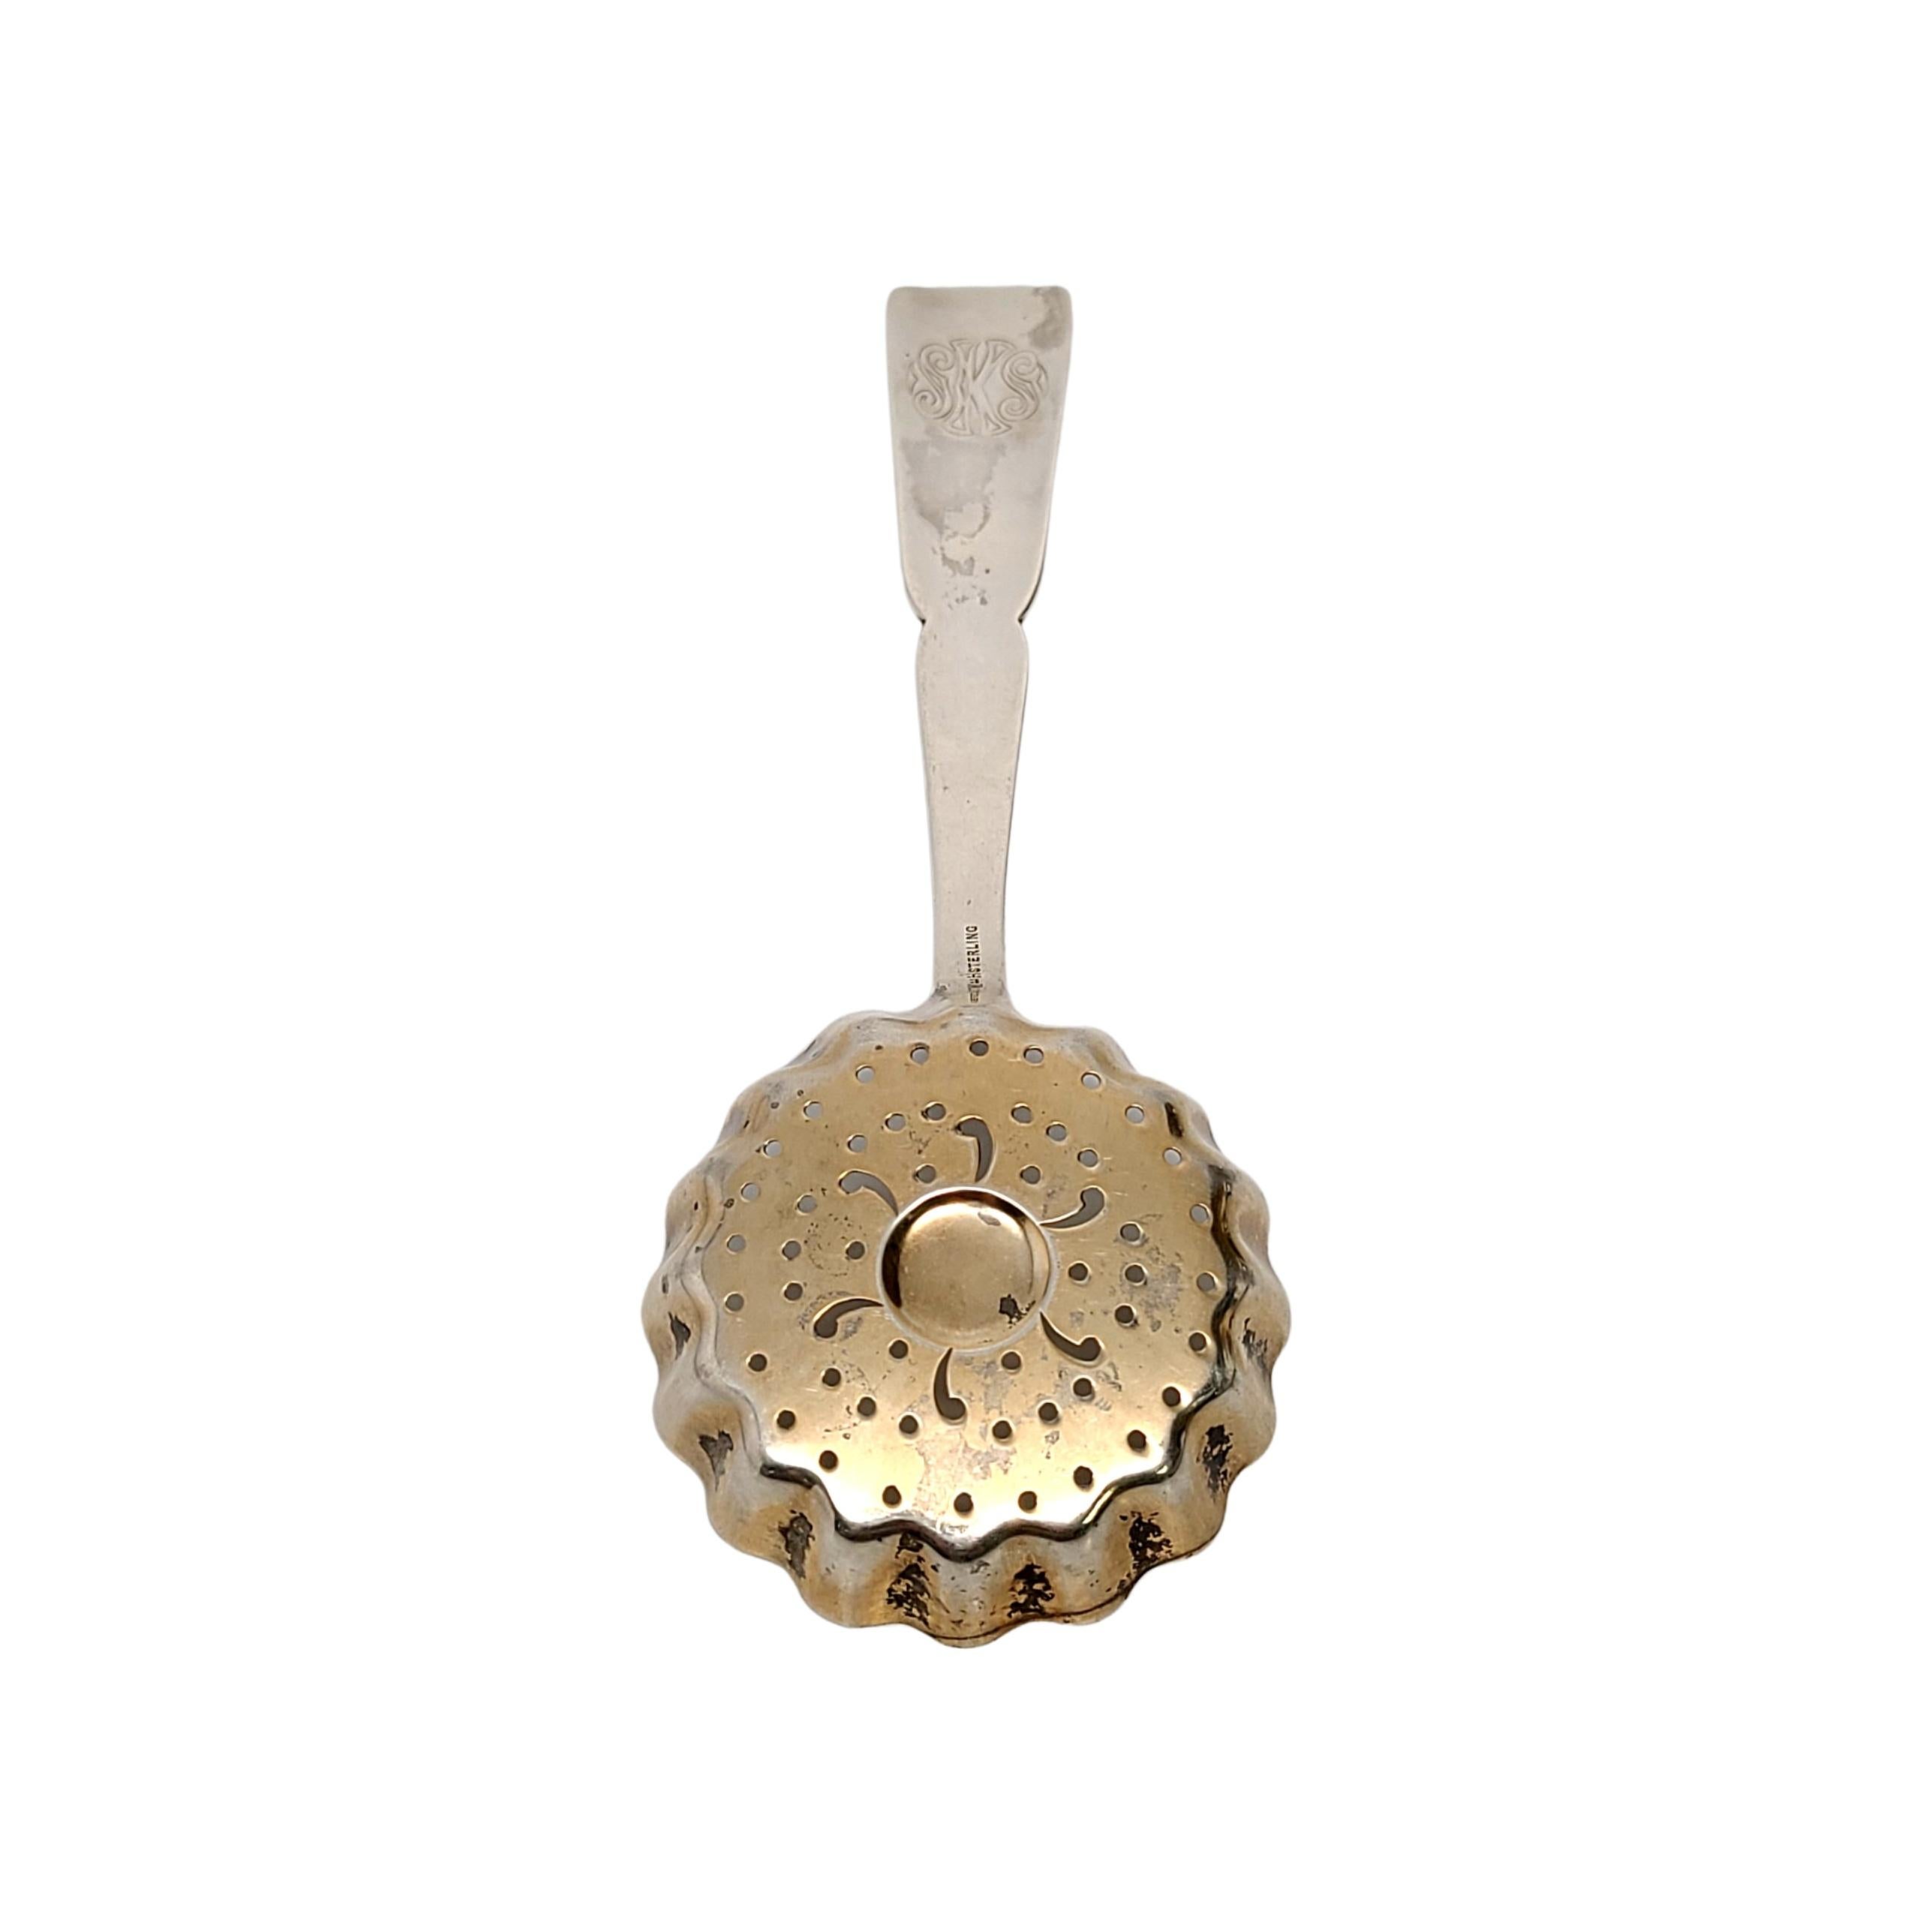 Sterling silver with gold wash bowl sugar sifter by Wood & Hughes in the Byzantine pattern, with monogram.

Monogram appears to be SKS on the back of the handle.

Wood & Hughes' Byzantine is a multi motif pattern designed in 1875. The pattern